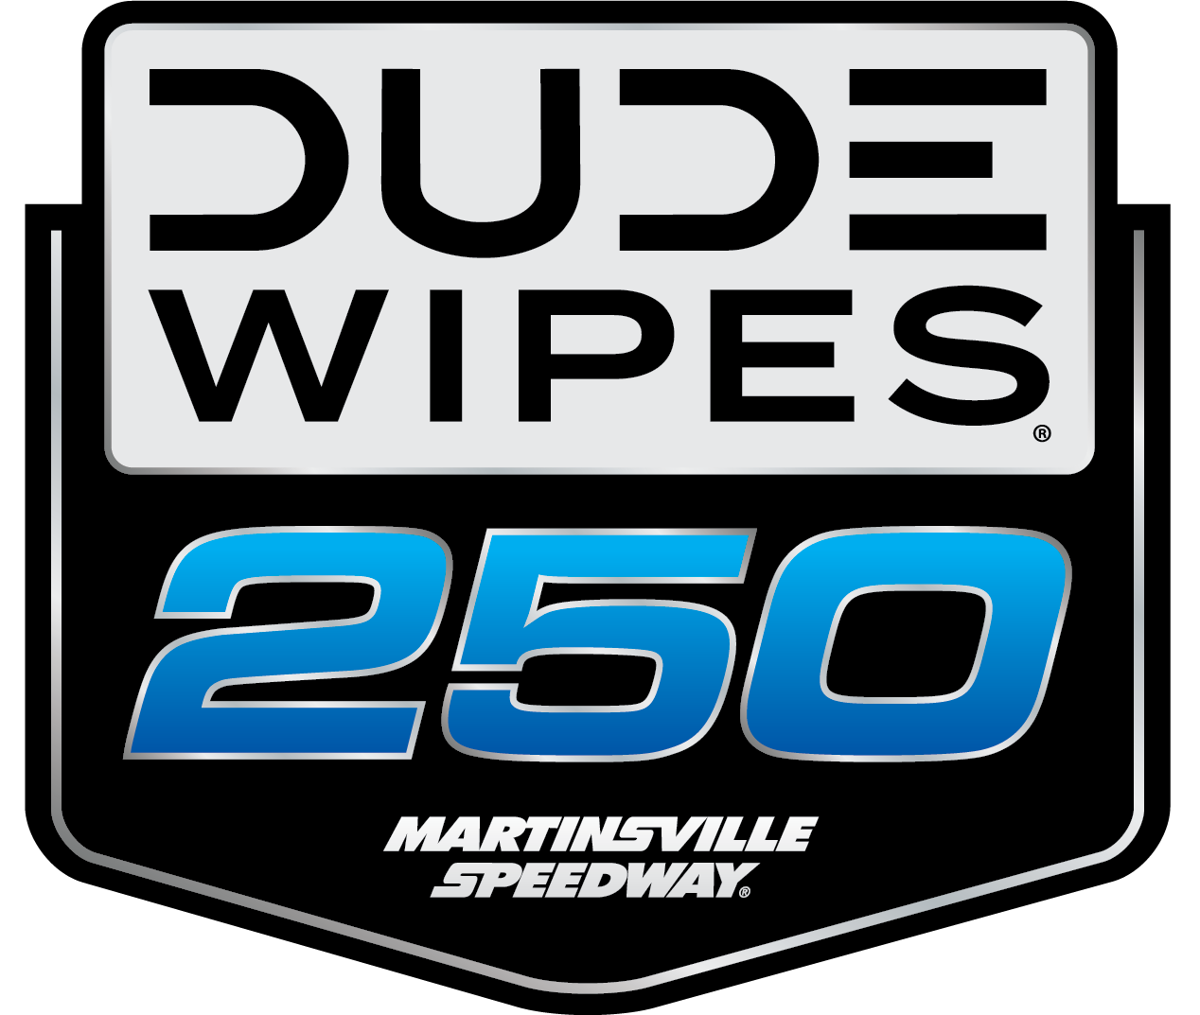 DUDE Wipes, Martinsville Speedway join forces for April's NASCAR